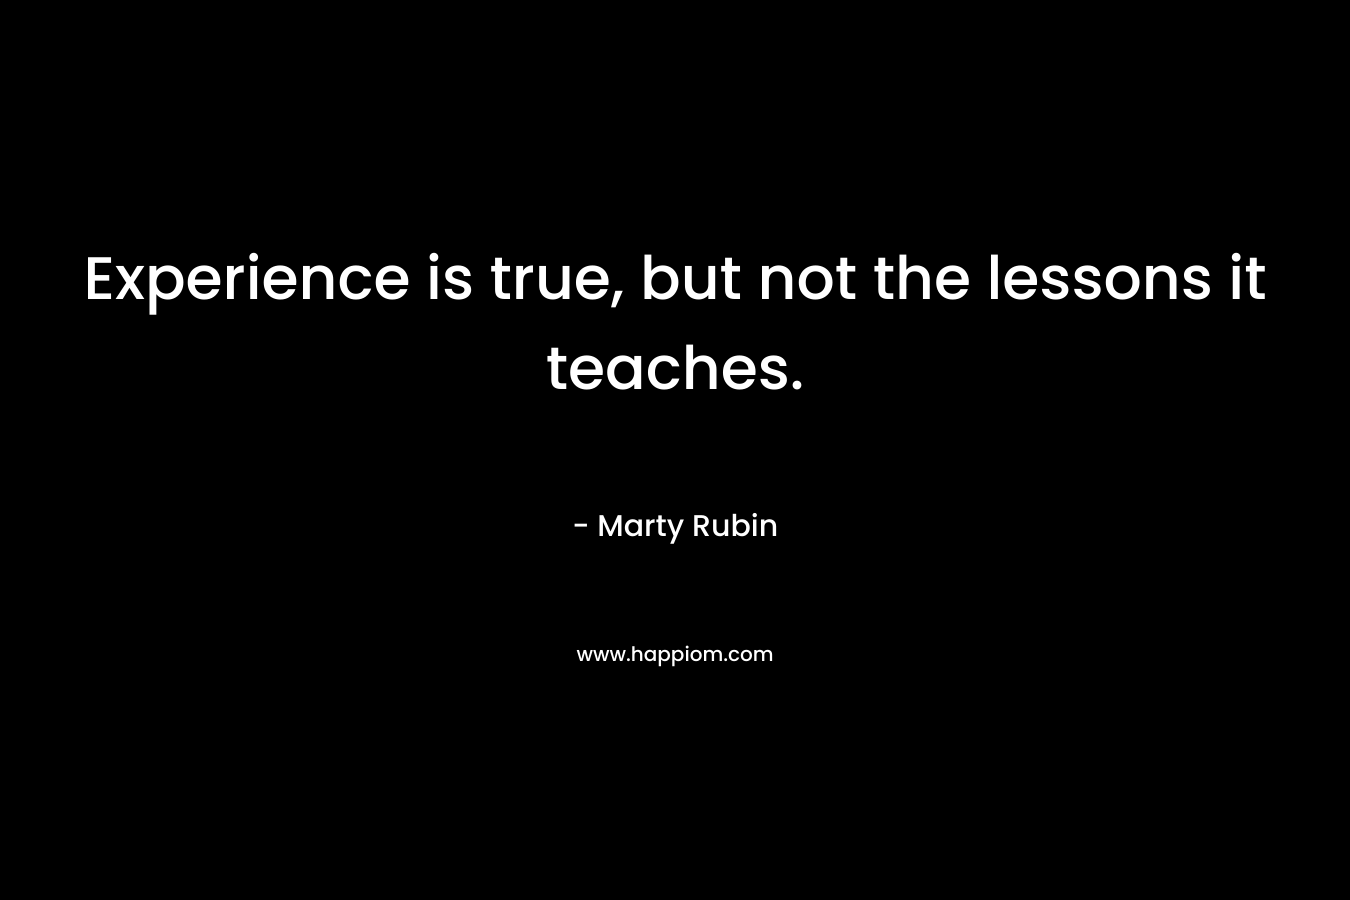 Experience is true, but not the lessons it teaches.